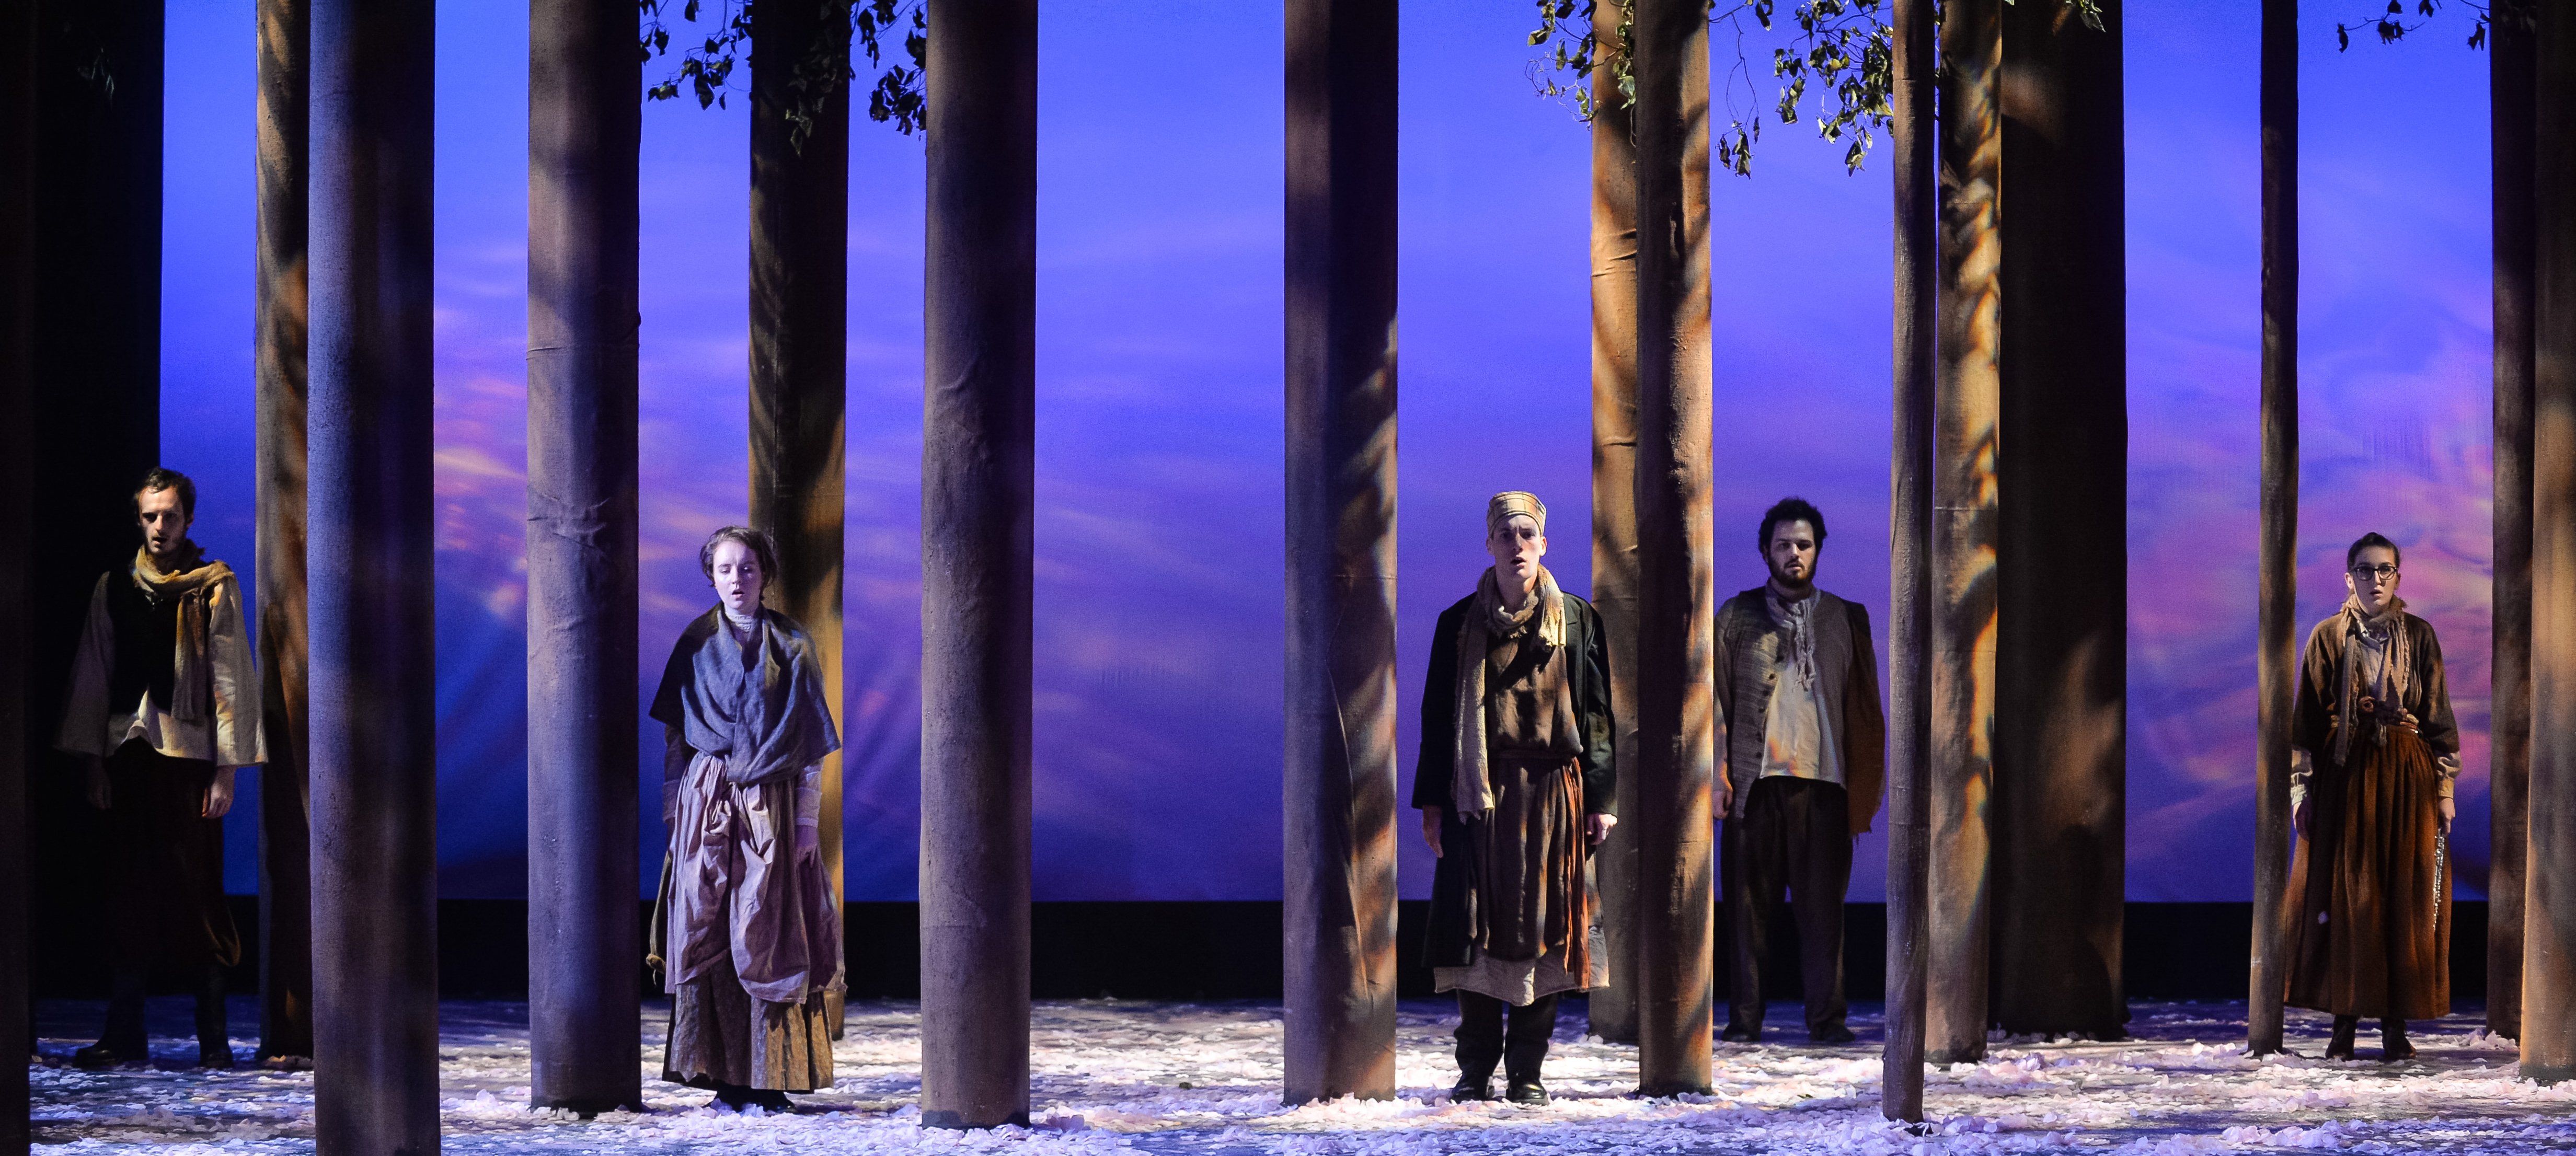 Five ensemble members performing in “The Cherry Orchard” by Anton Checkov. Actors are standing among the set of trees peering at the audience.